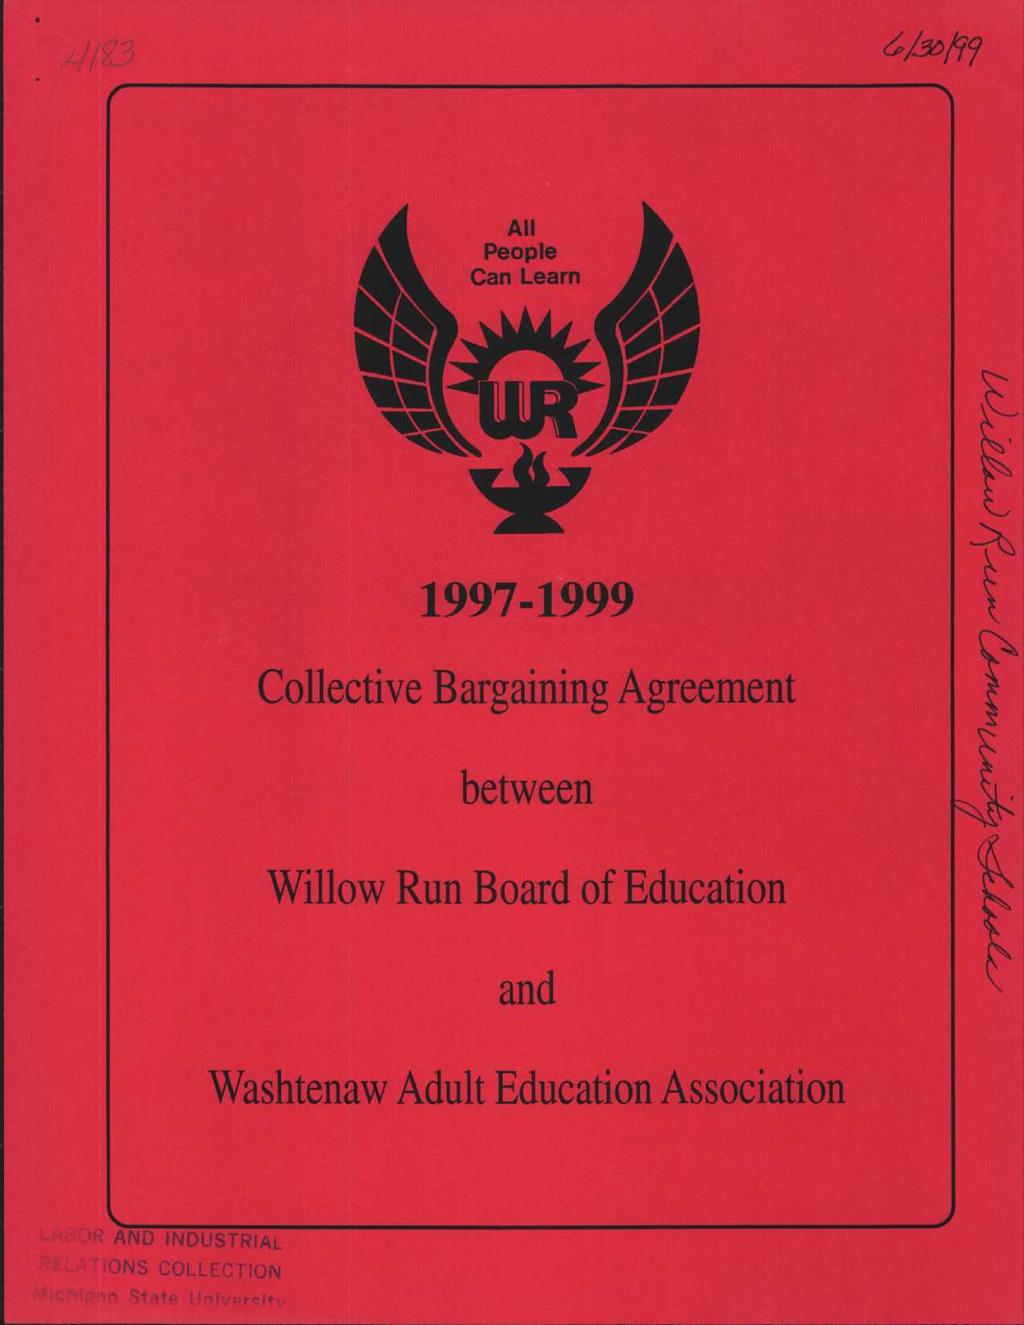 All People Can Learn 1997-1999 Collective Bargaining Agreement between Willow Run